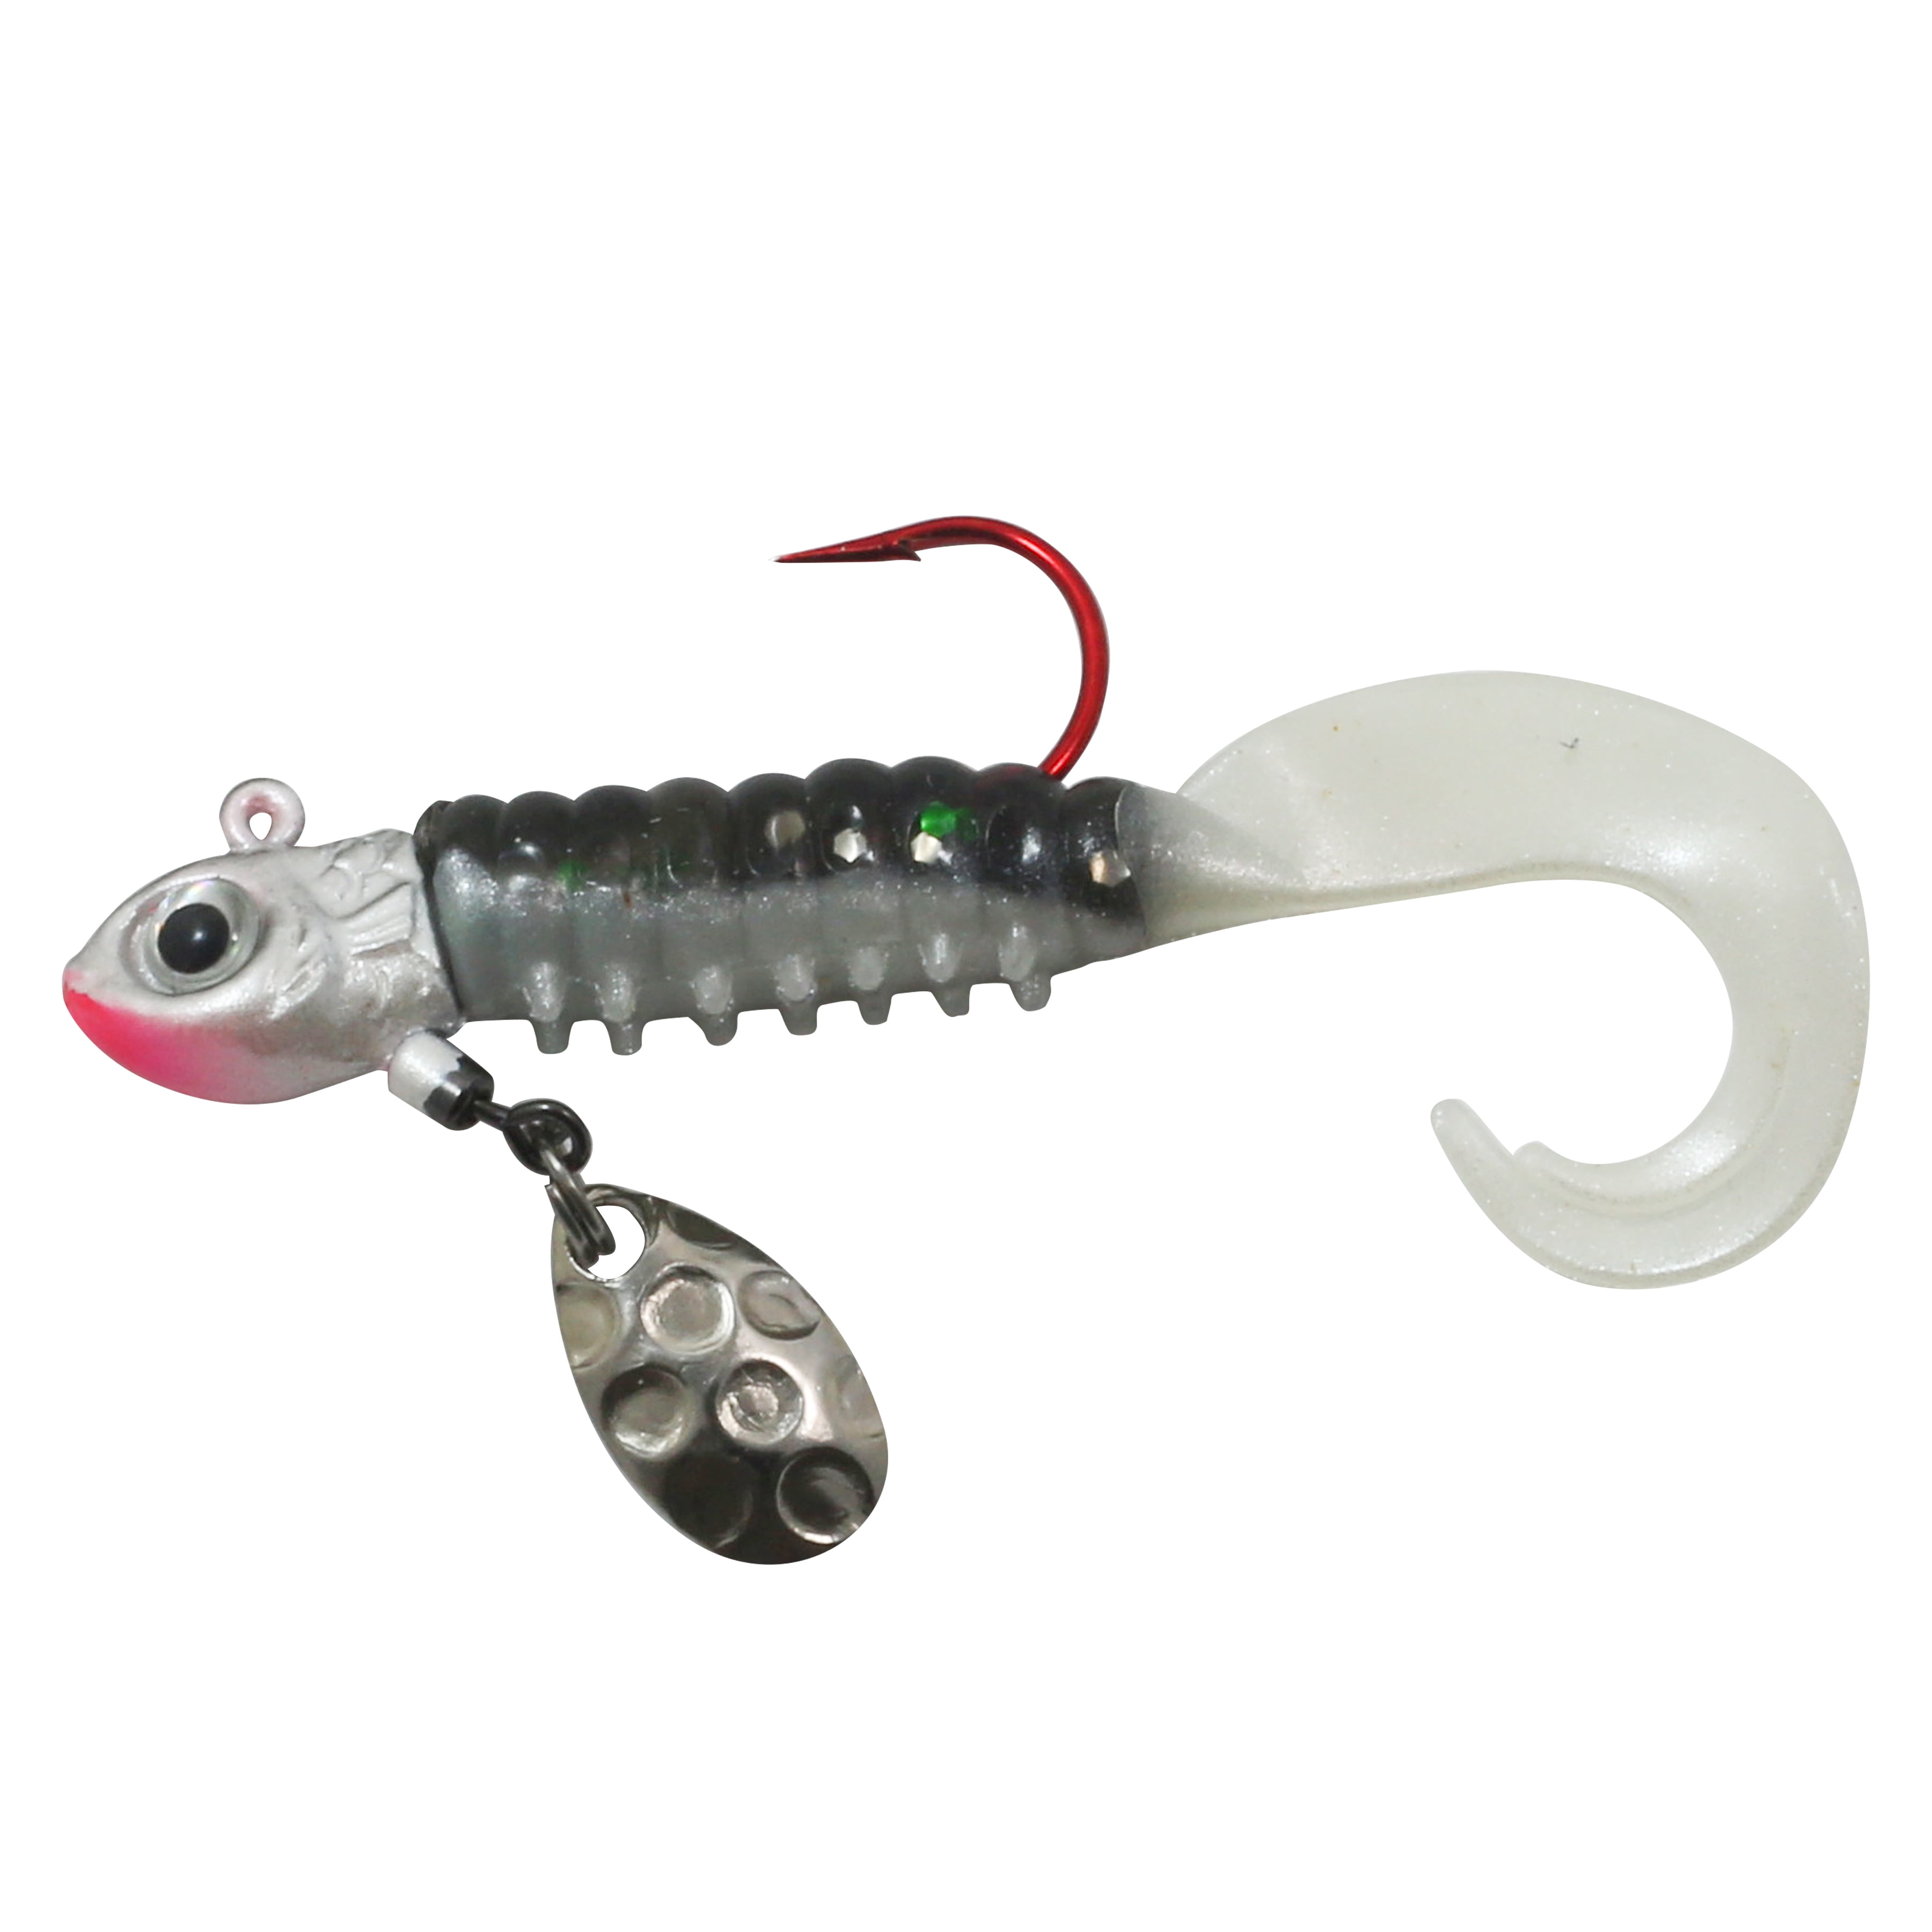 Tadpole crappie baits, Jigs, lures. Black Ice, 15 count.